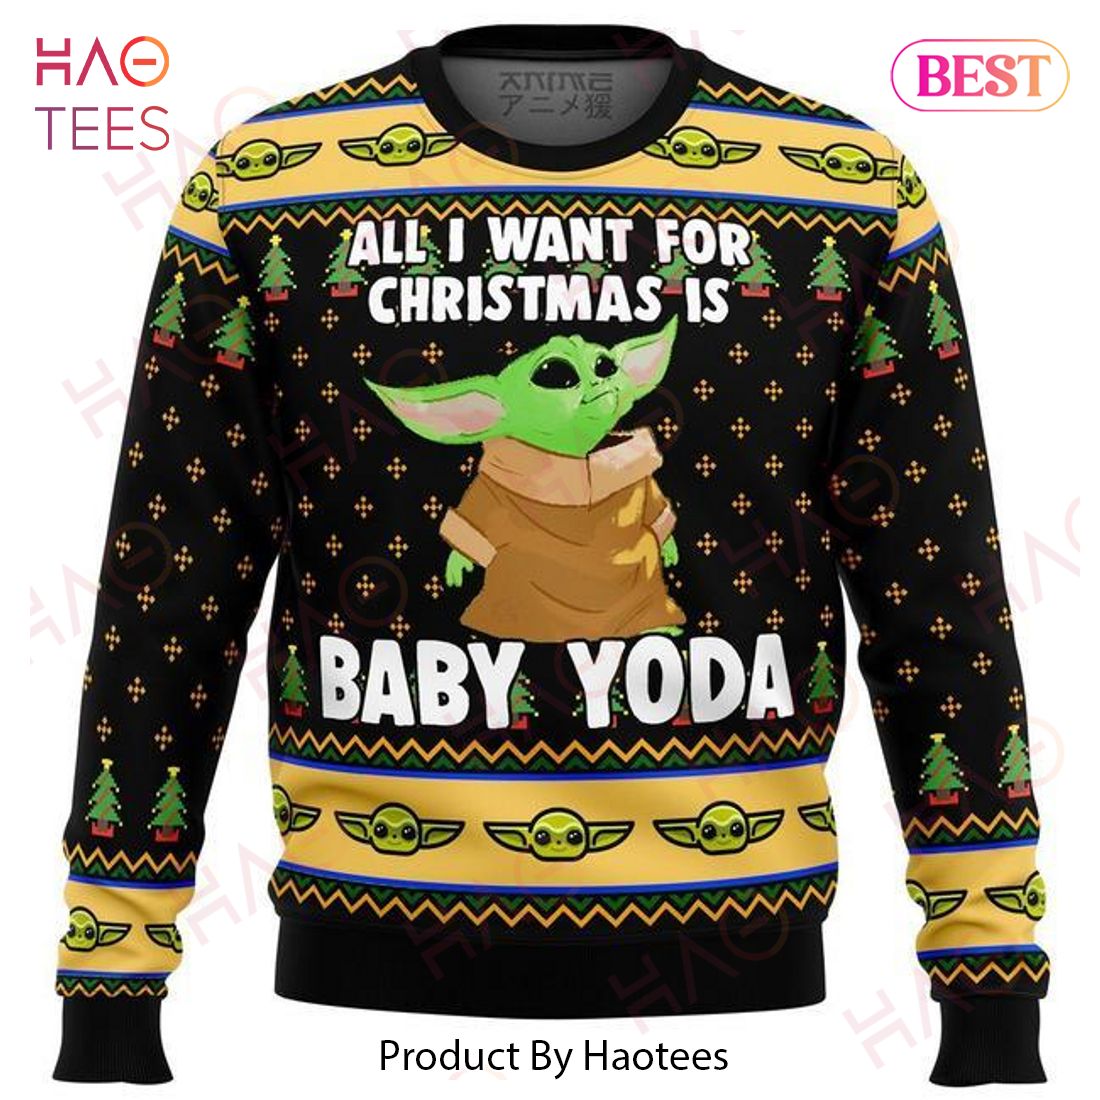 SW Christmas Sweater All I Want For Christmas Is Baby Yoda Black Green Yellow Ugly Sweater 2022